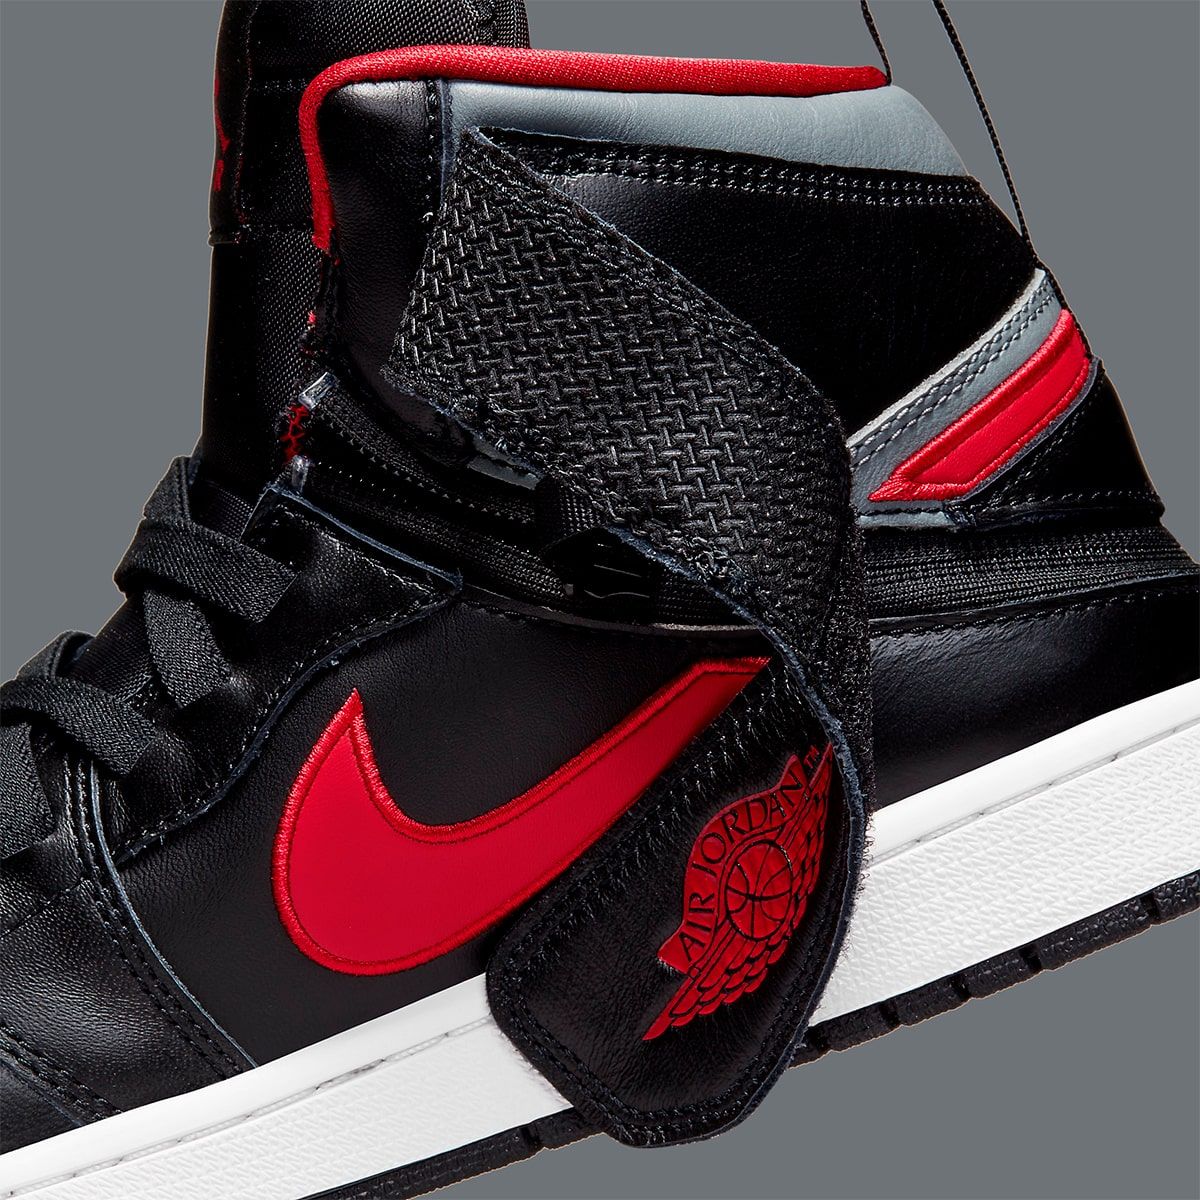 Air Jordan 1 FlyEase Appears in Black, Gym Red and Smoke Grey | HOUSE ...